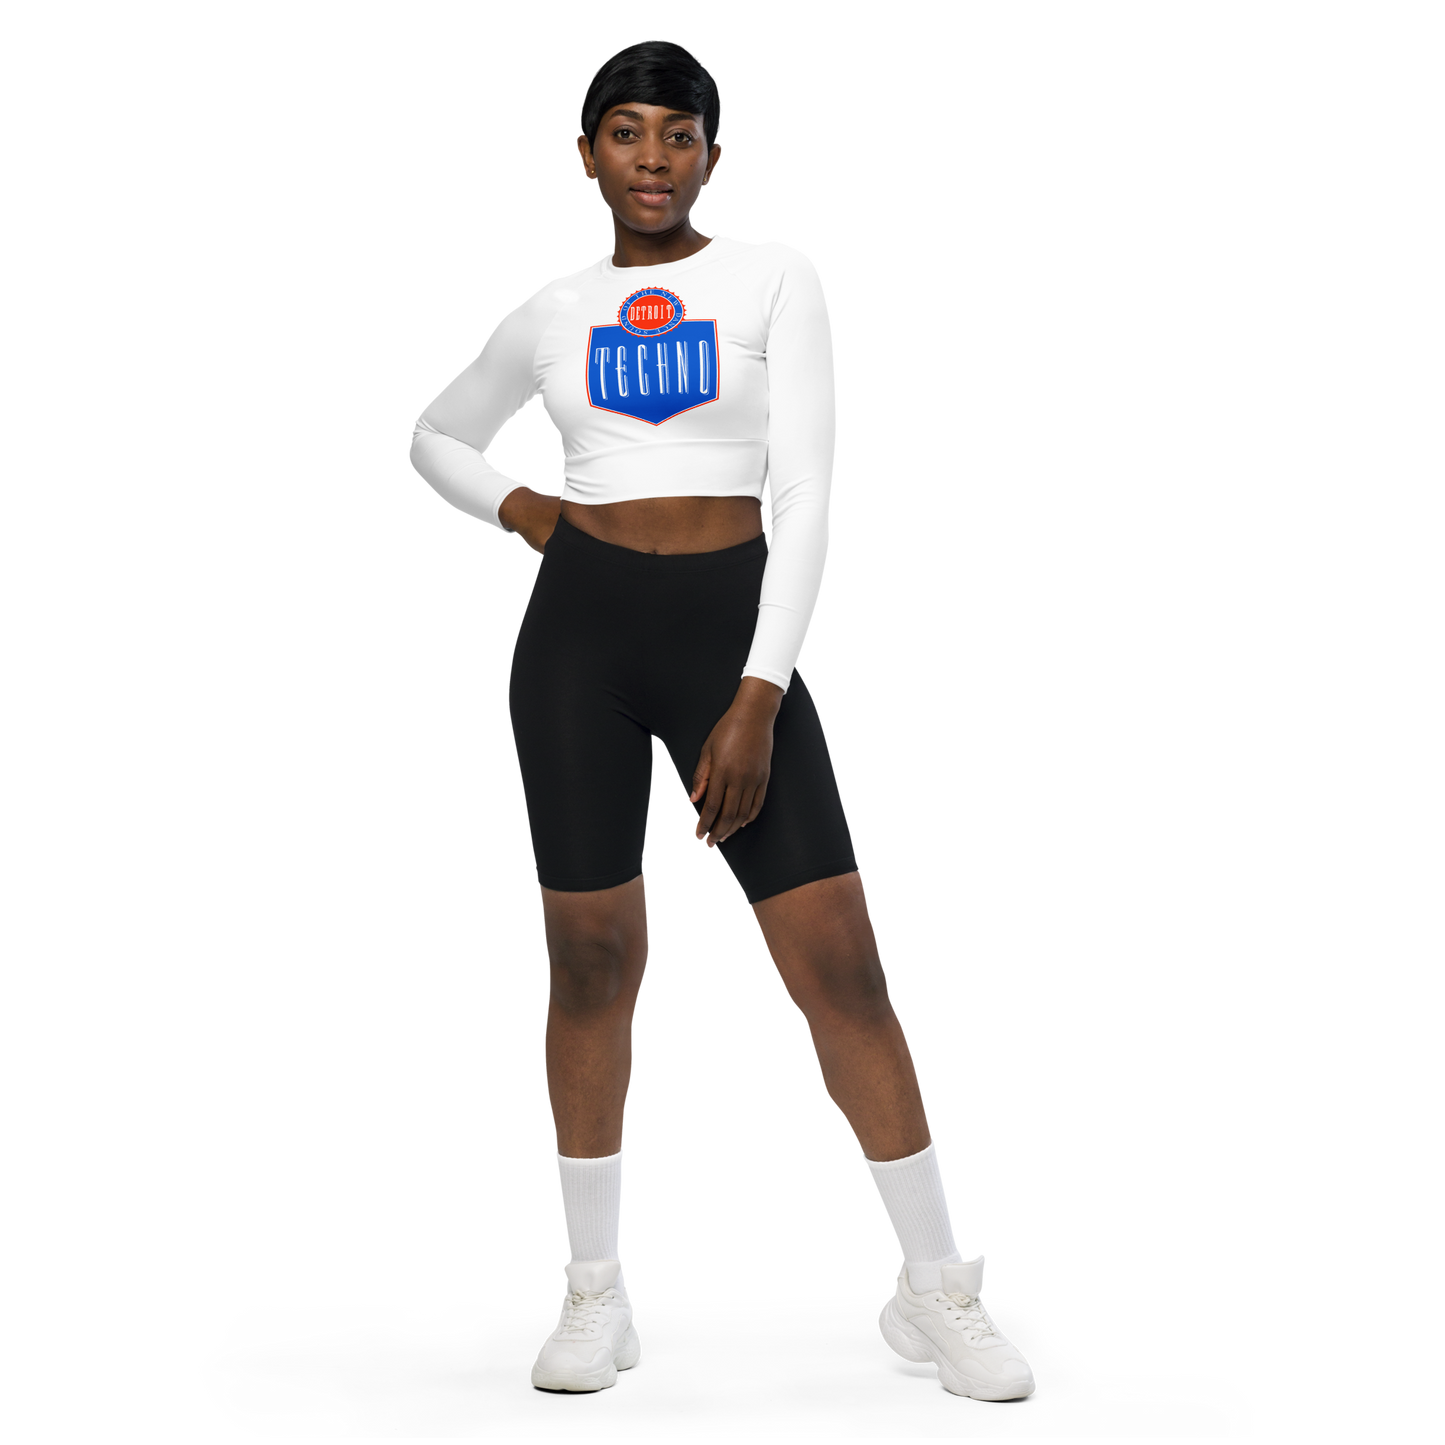 TRANSMAT OFFICIAL Detroit Techno Recycled long-sleeve crop top